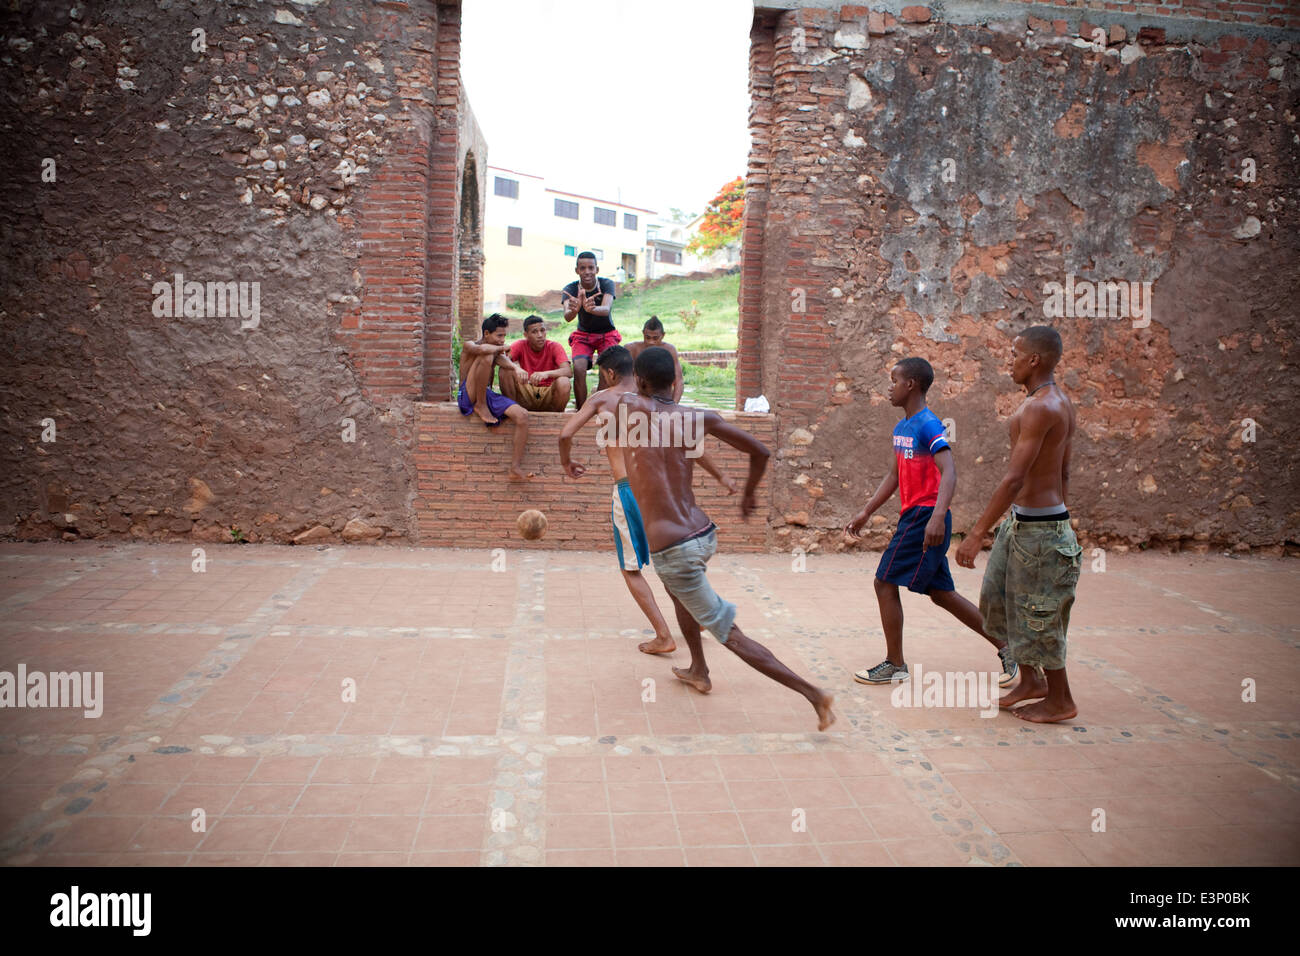 Boys playing soccer in the remains of a church. Trinidad, Cuba Stock Photo